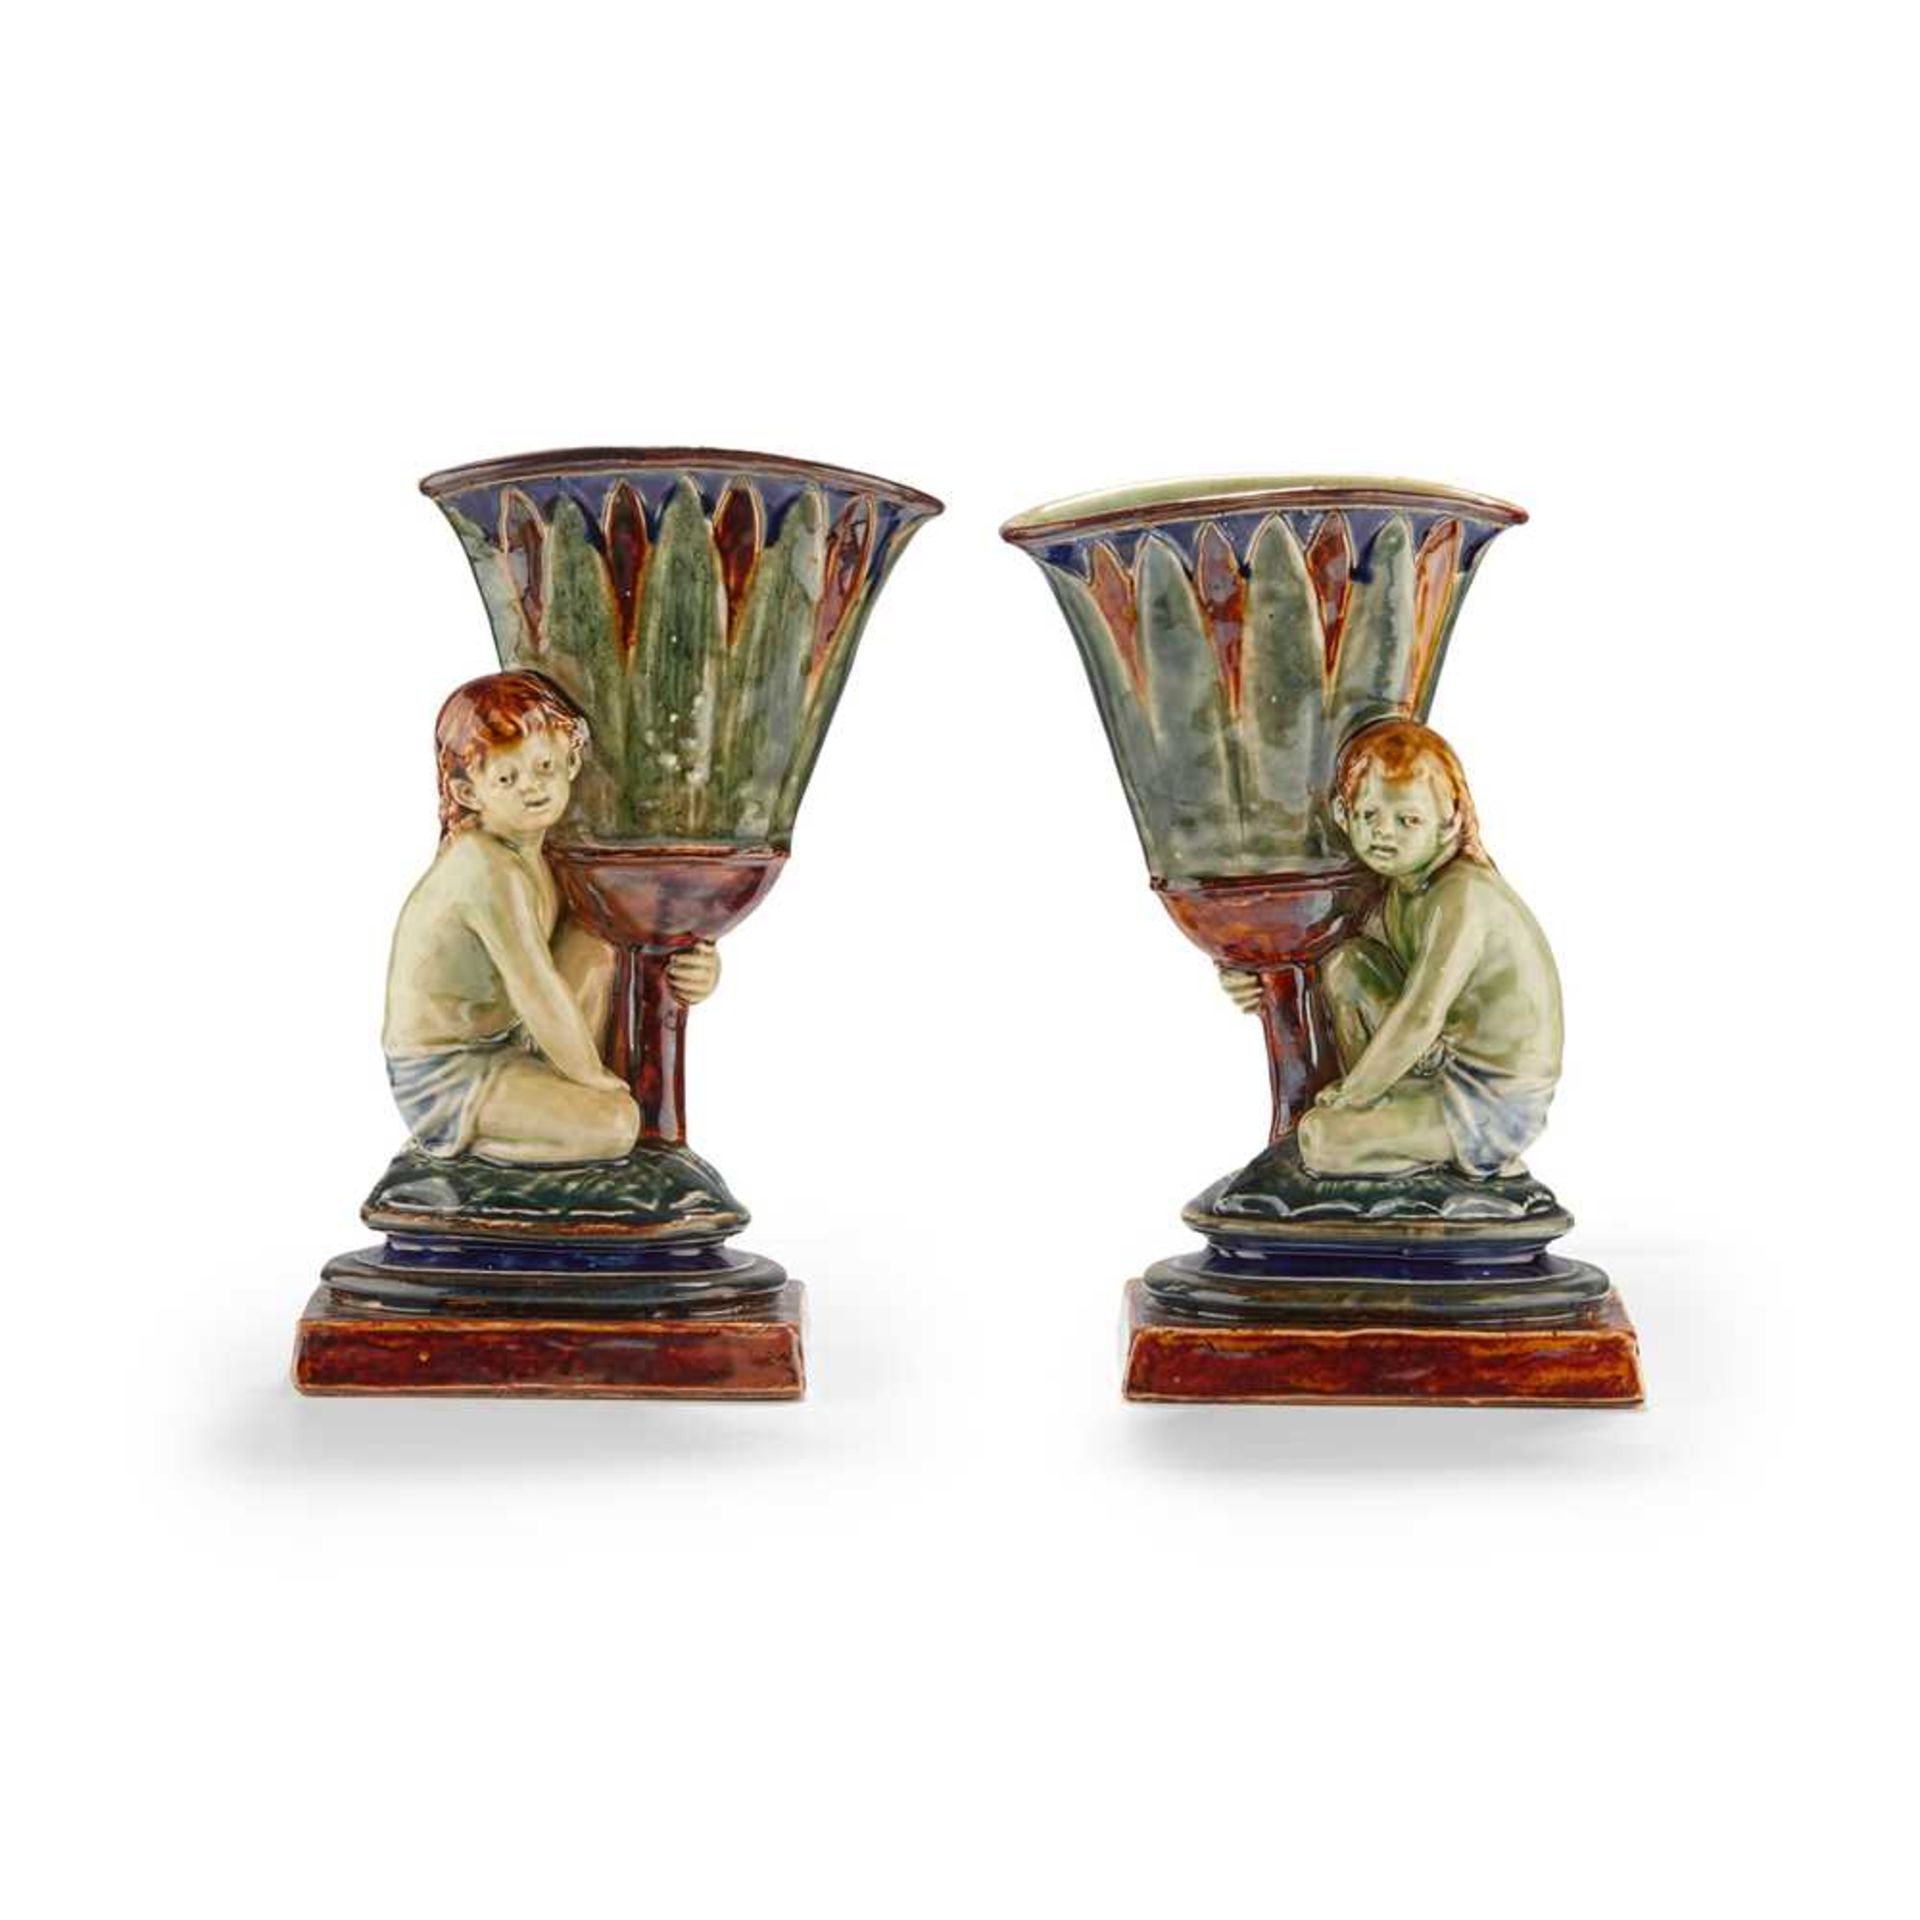 GEORGE TINWORTH (1843-1913) FOR DOULTON, LAMBETH PAIR OF SPILL VASES, CIRCA 1880